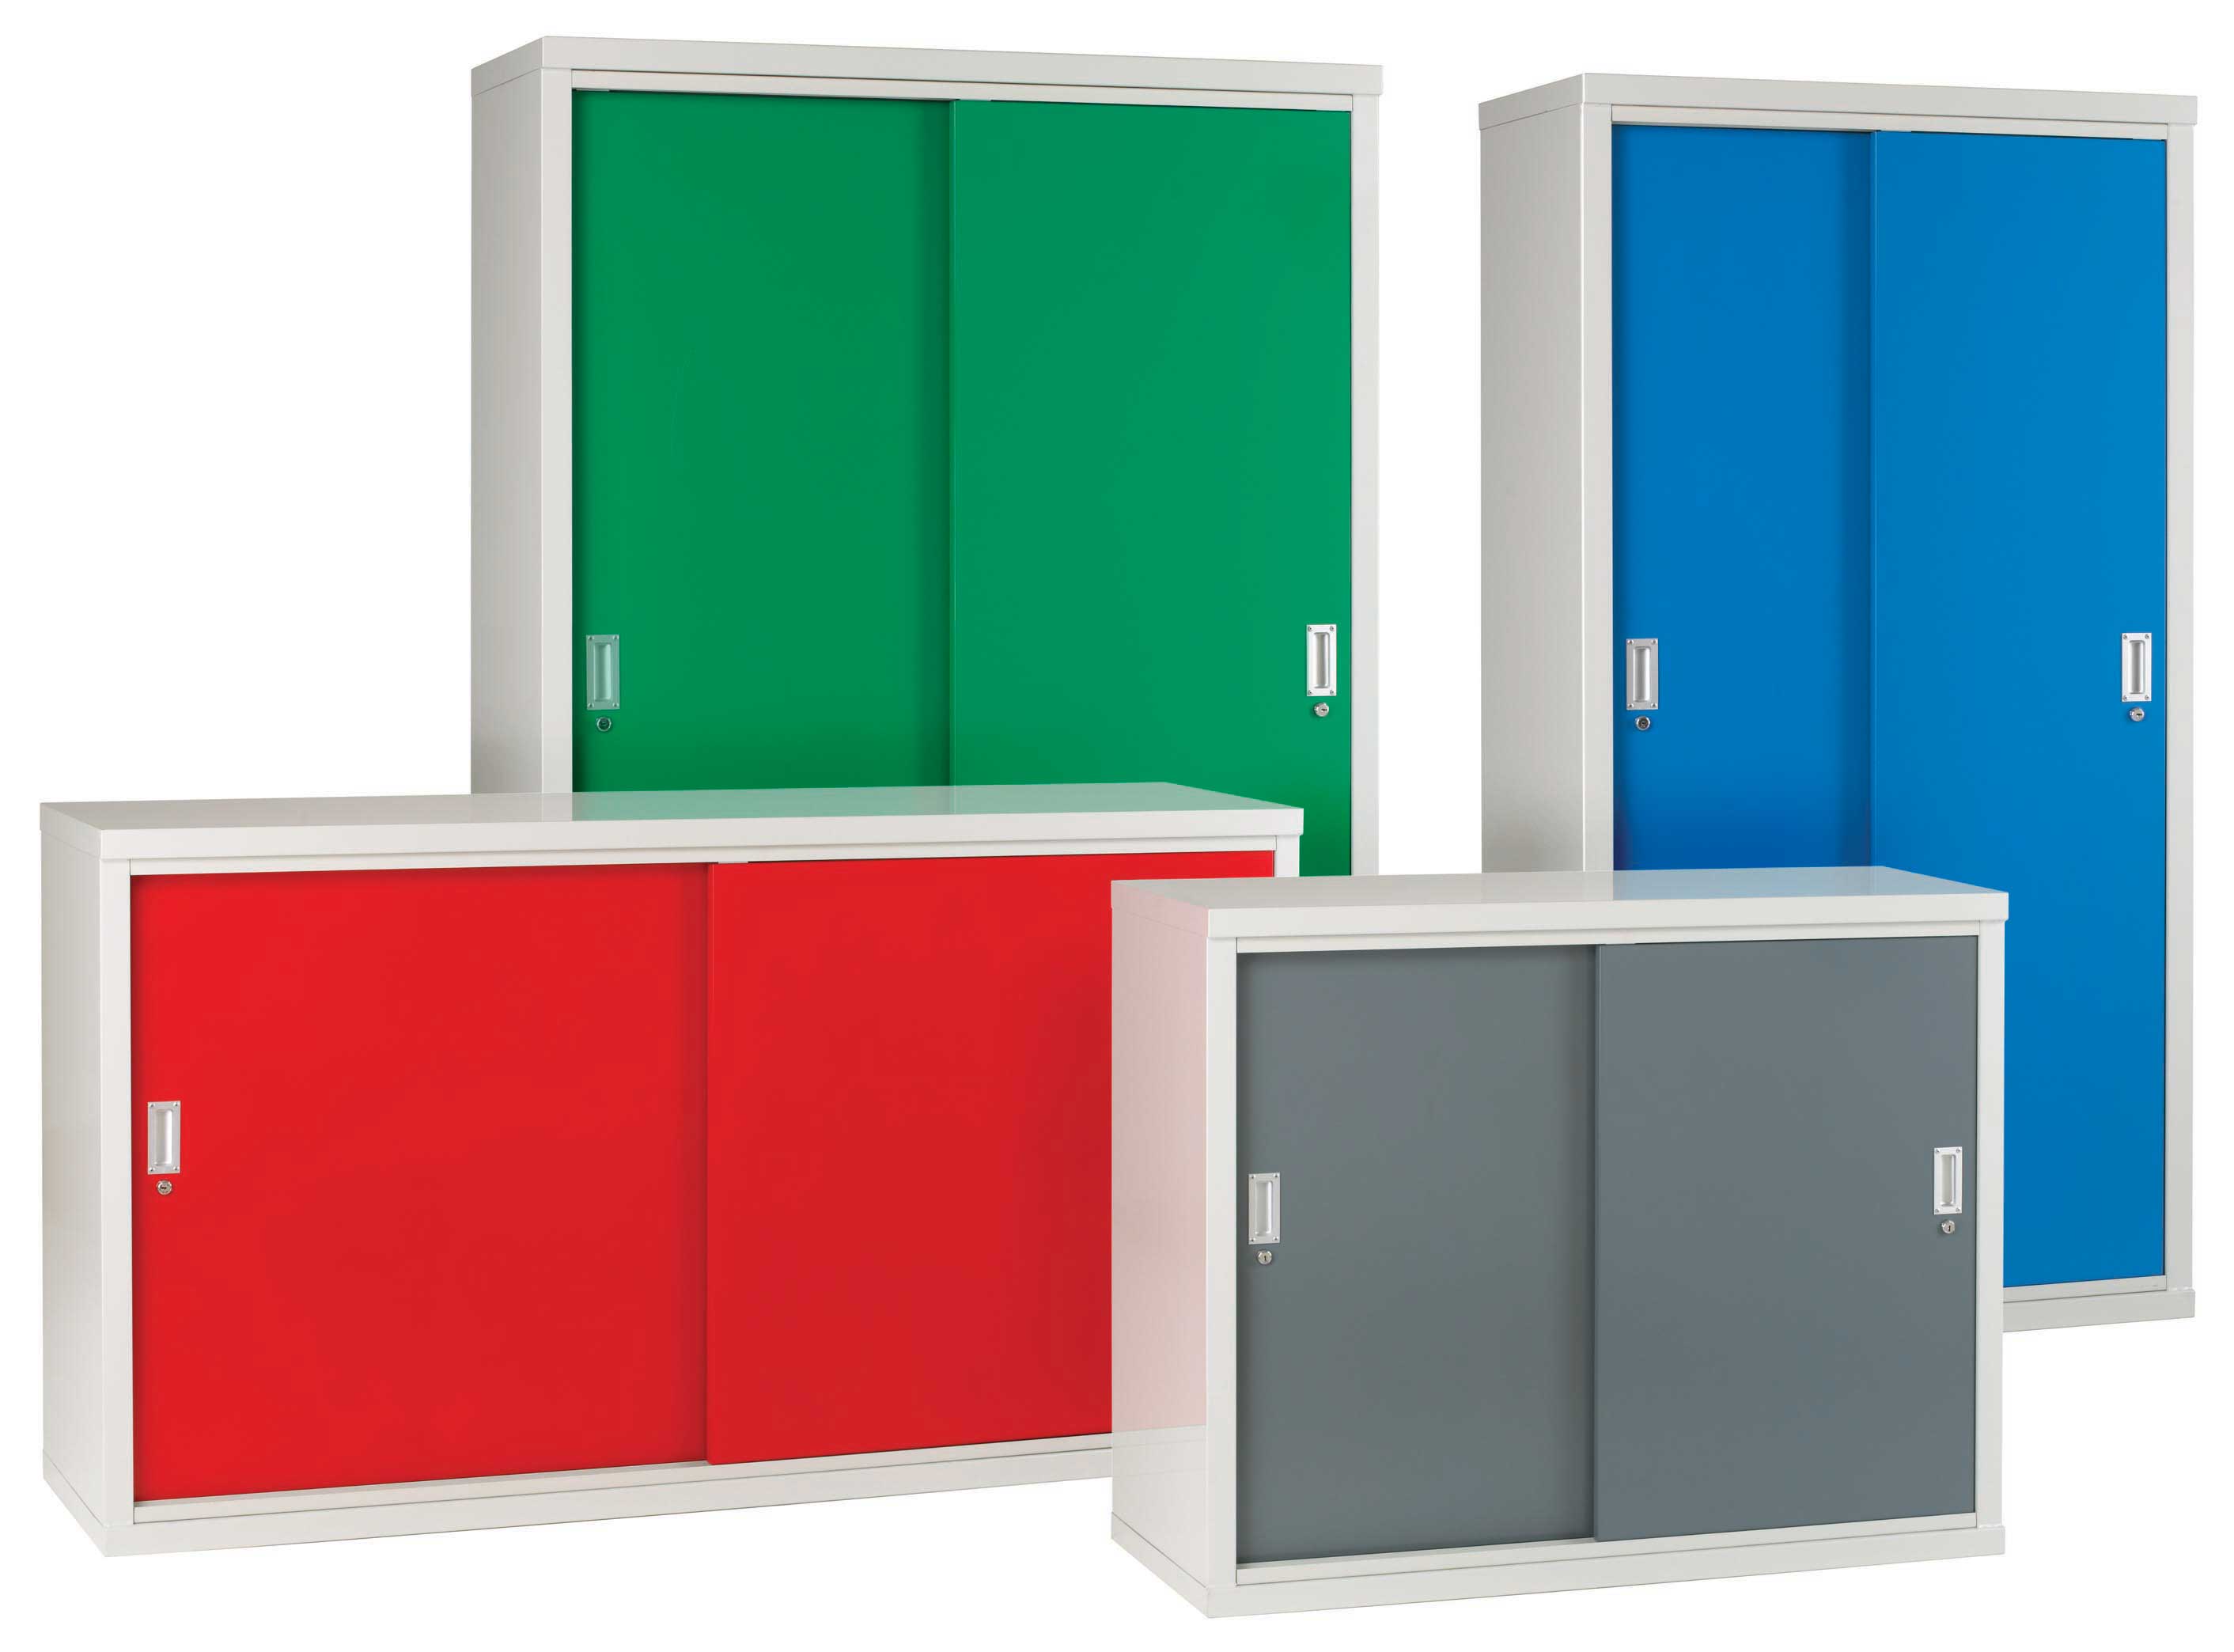 Steel Cabinets With Sliding Doors